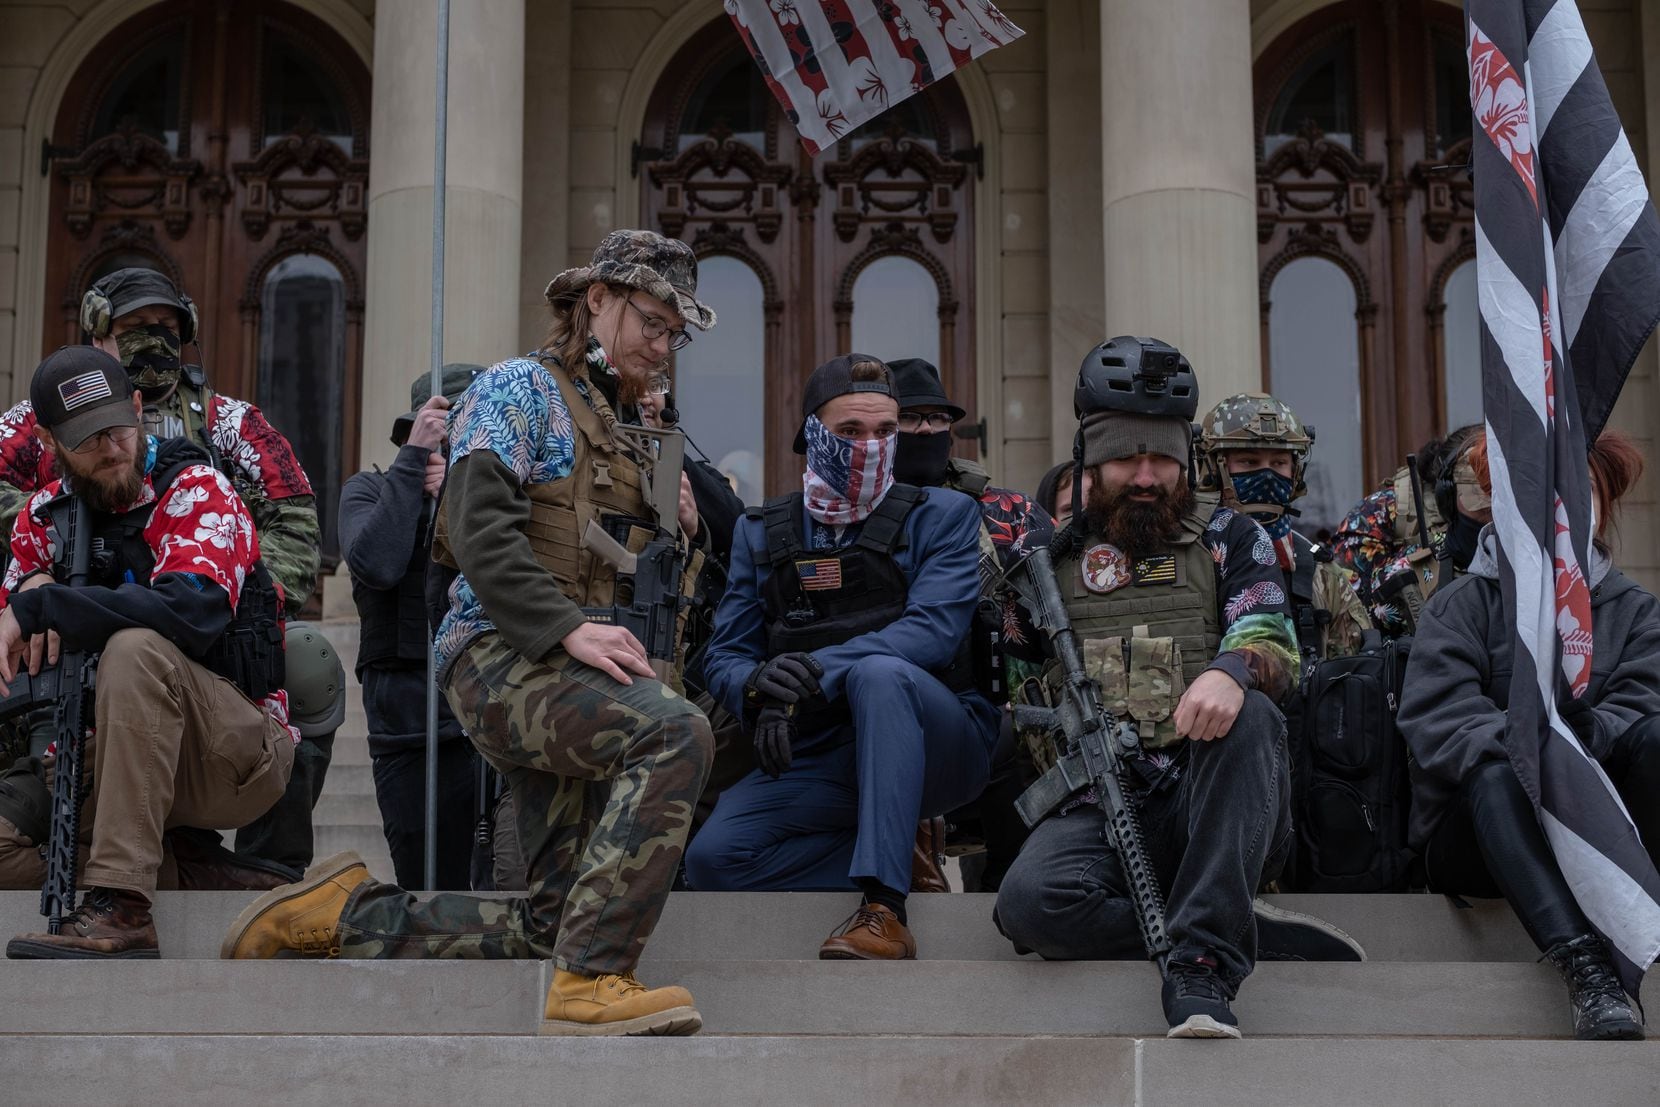 Boogaloo Boys kneel on the steps of the Michigan capitol in Lansing on Oct. 17, 2020. Two...